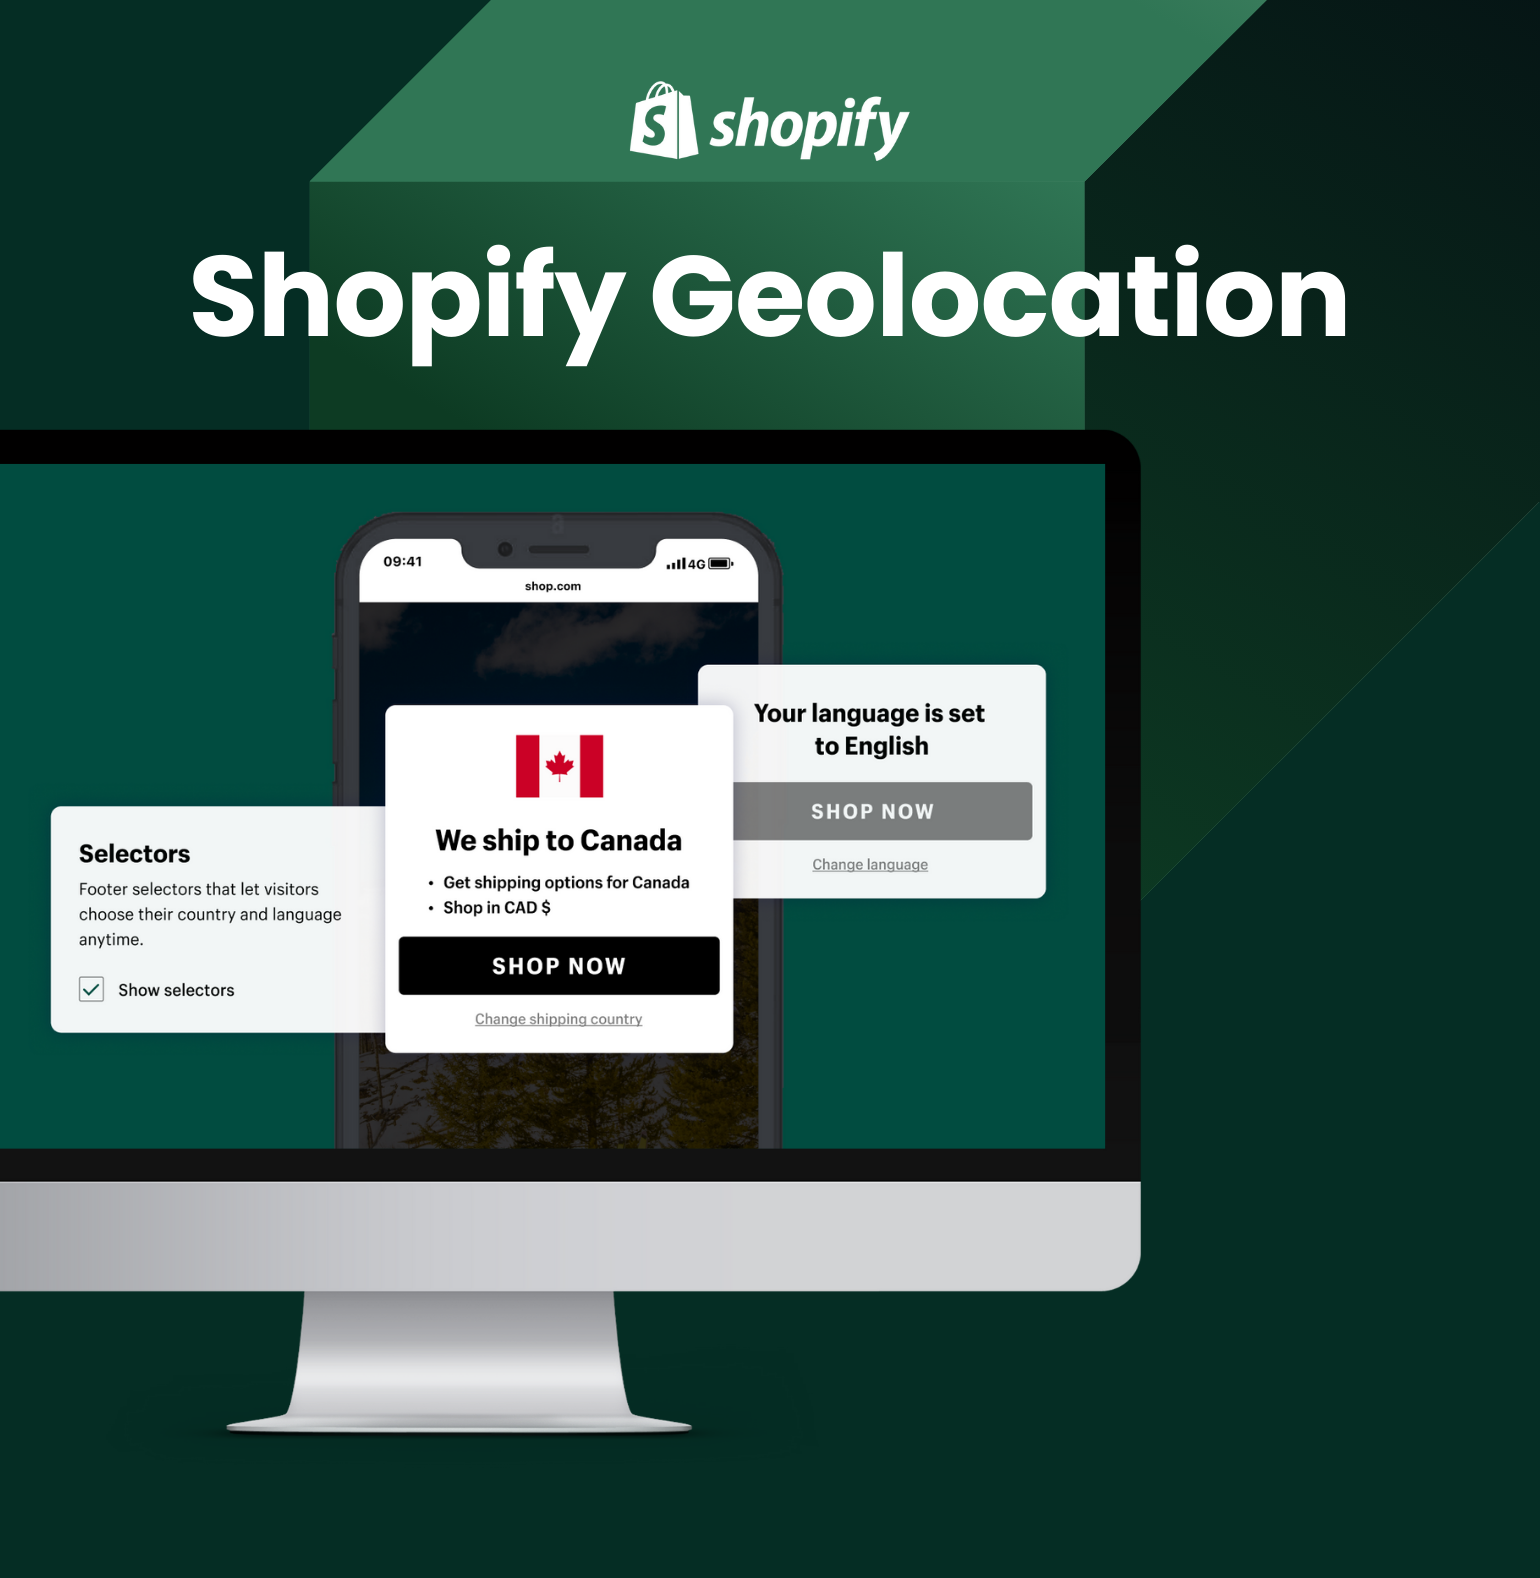 Shopify Geolocation - Enhance Sales with Geolocation: Tailored Recommendations